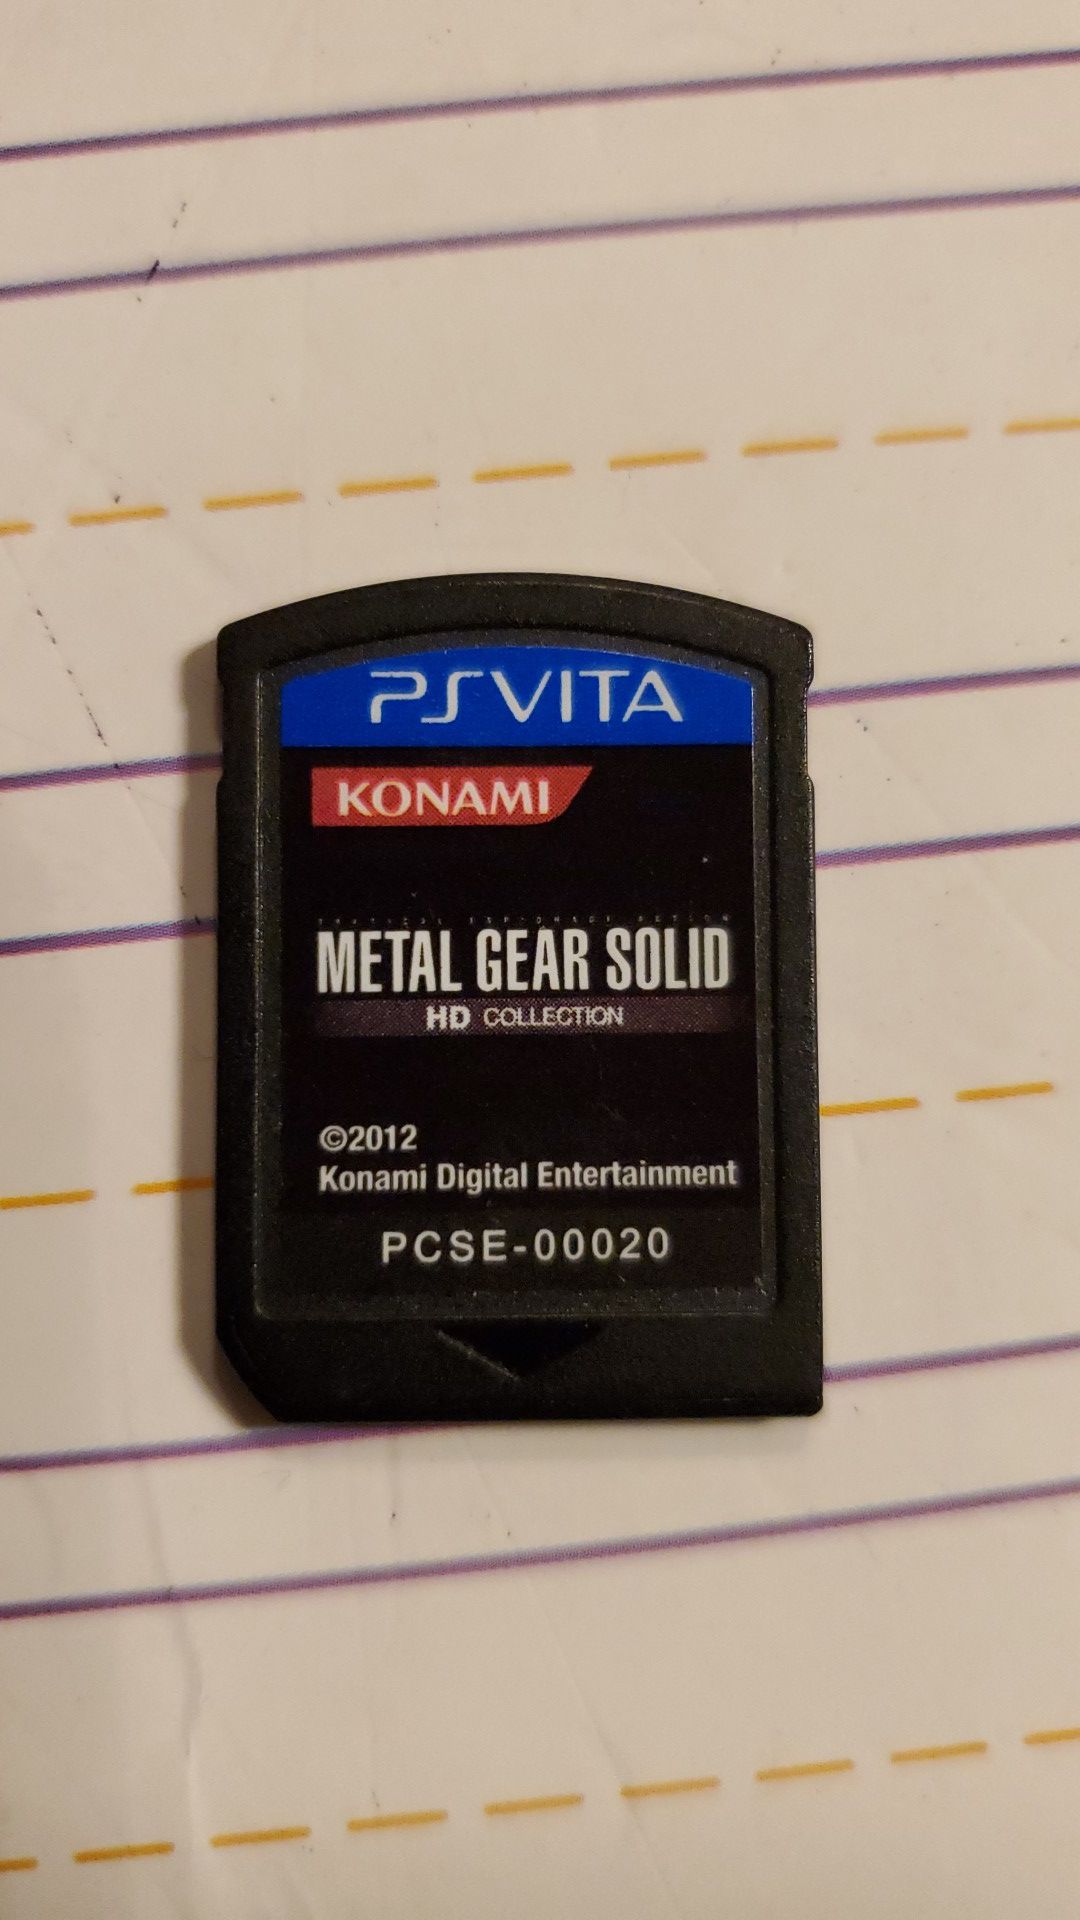 PSVITA Metal Gear Solid, DH Collection